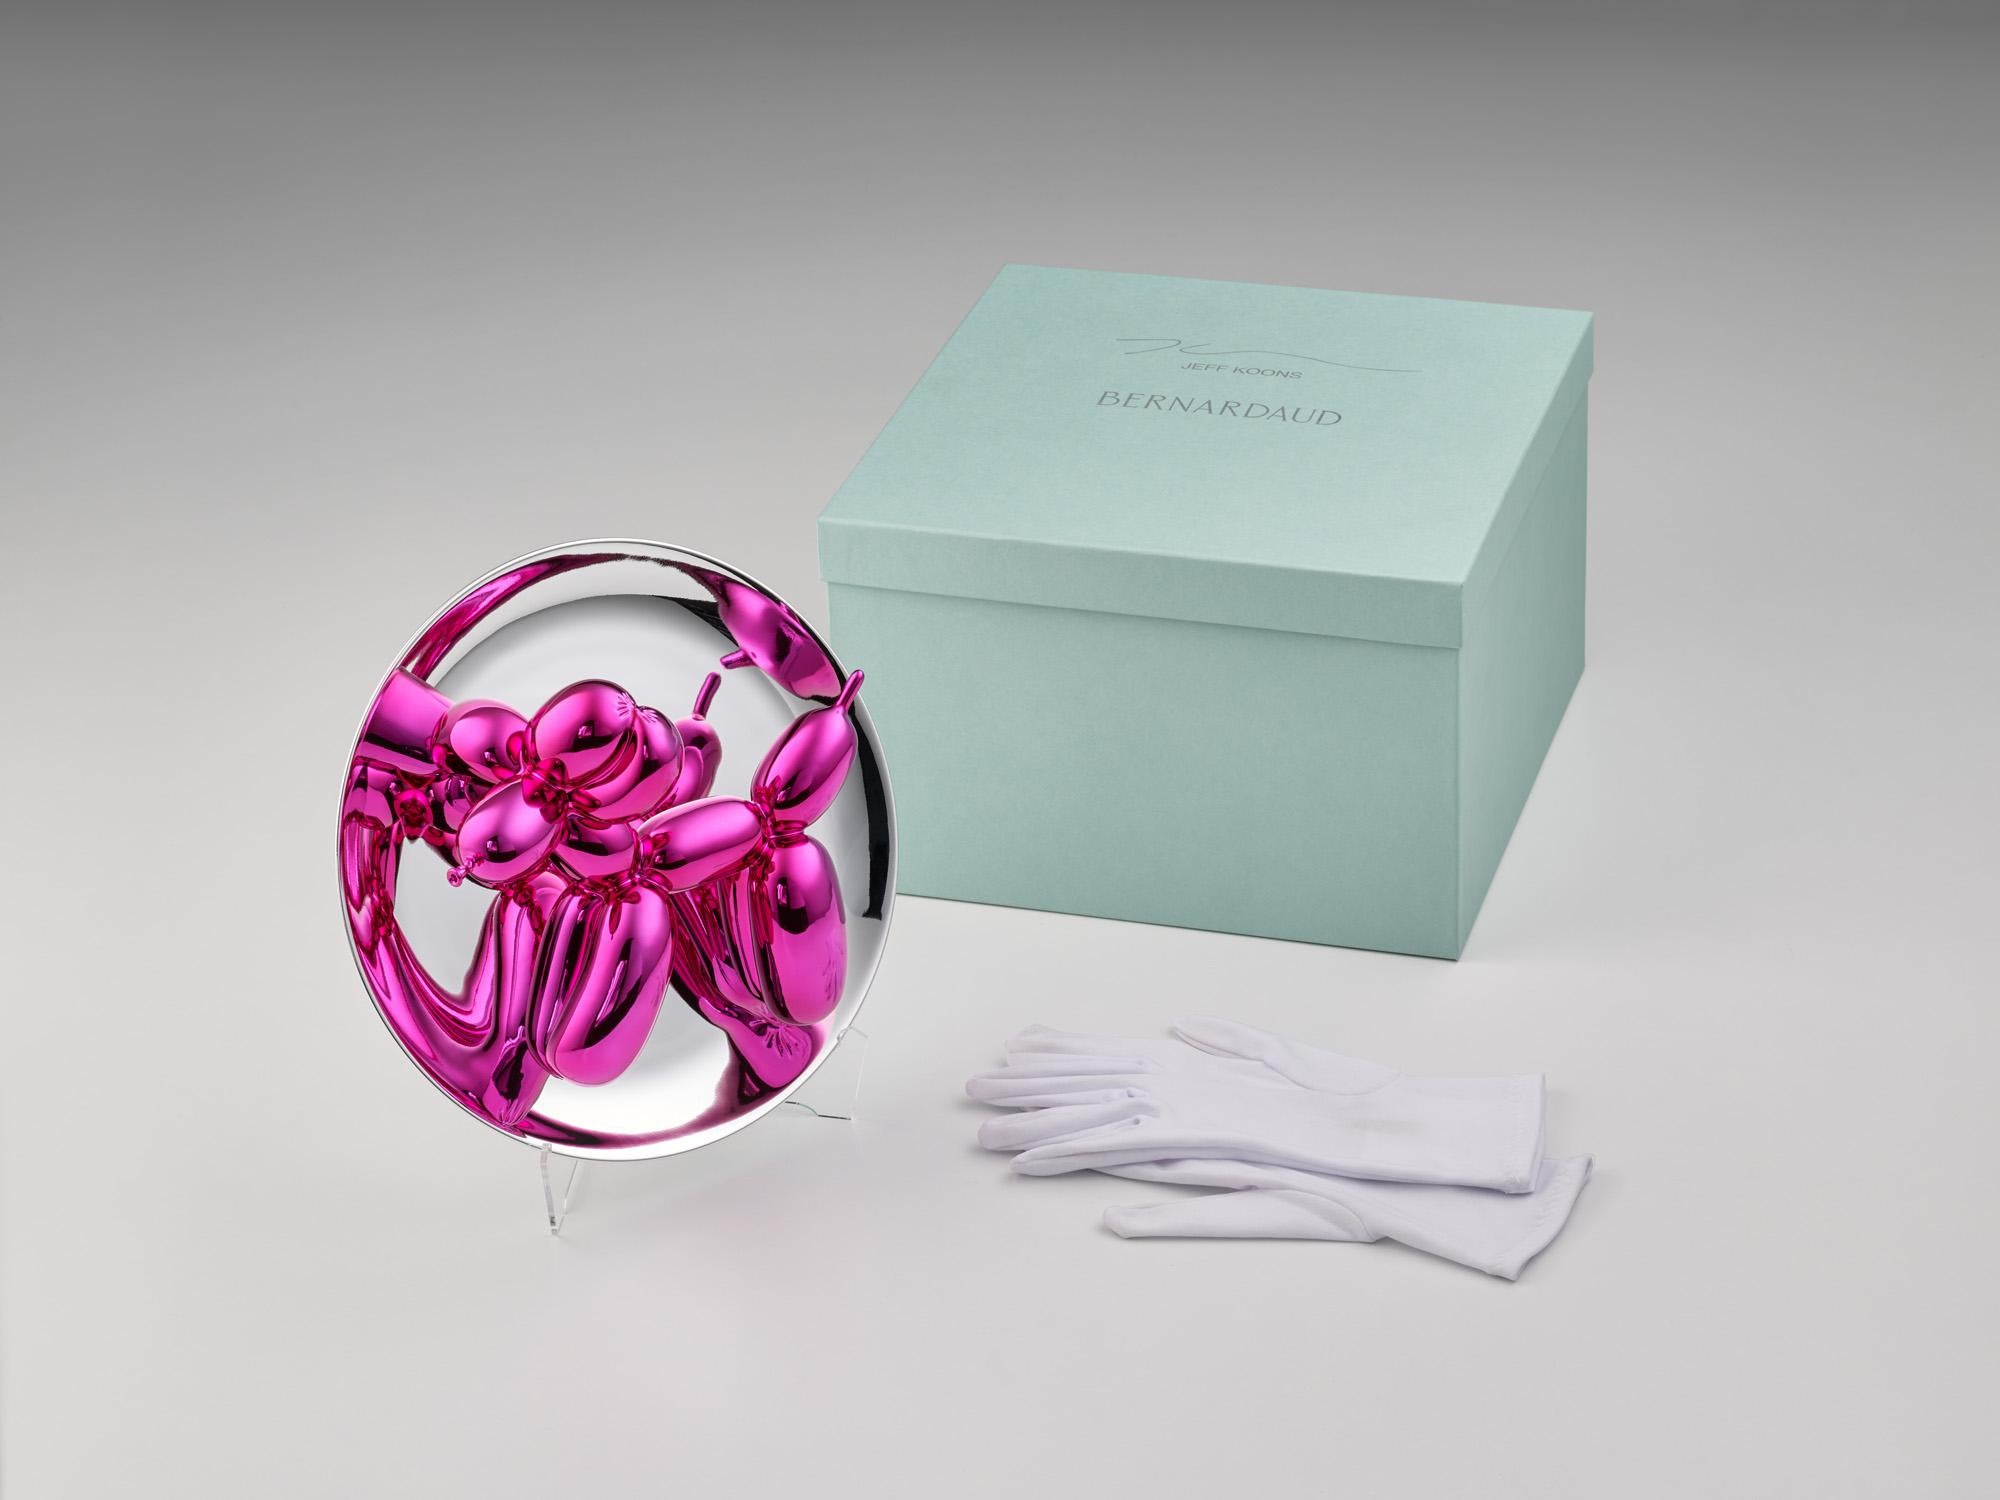 Balloon Dog (Magenta) - Jeff Koons, Contemporary, 21st Century, Sculpture, Decor, Limited Edition

Limoges porcelain with chromatic metalized coating
Edition of 2300
Signed and numbered
In mint condition, as acquired from the manufacturer
In the